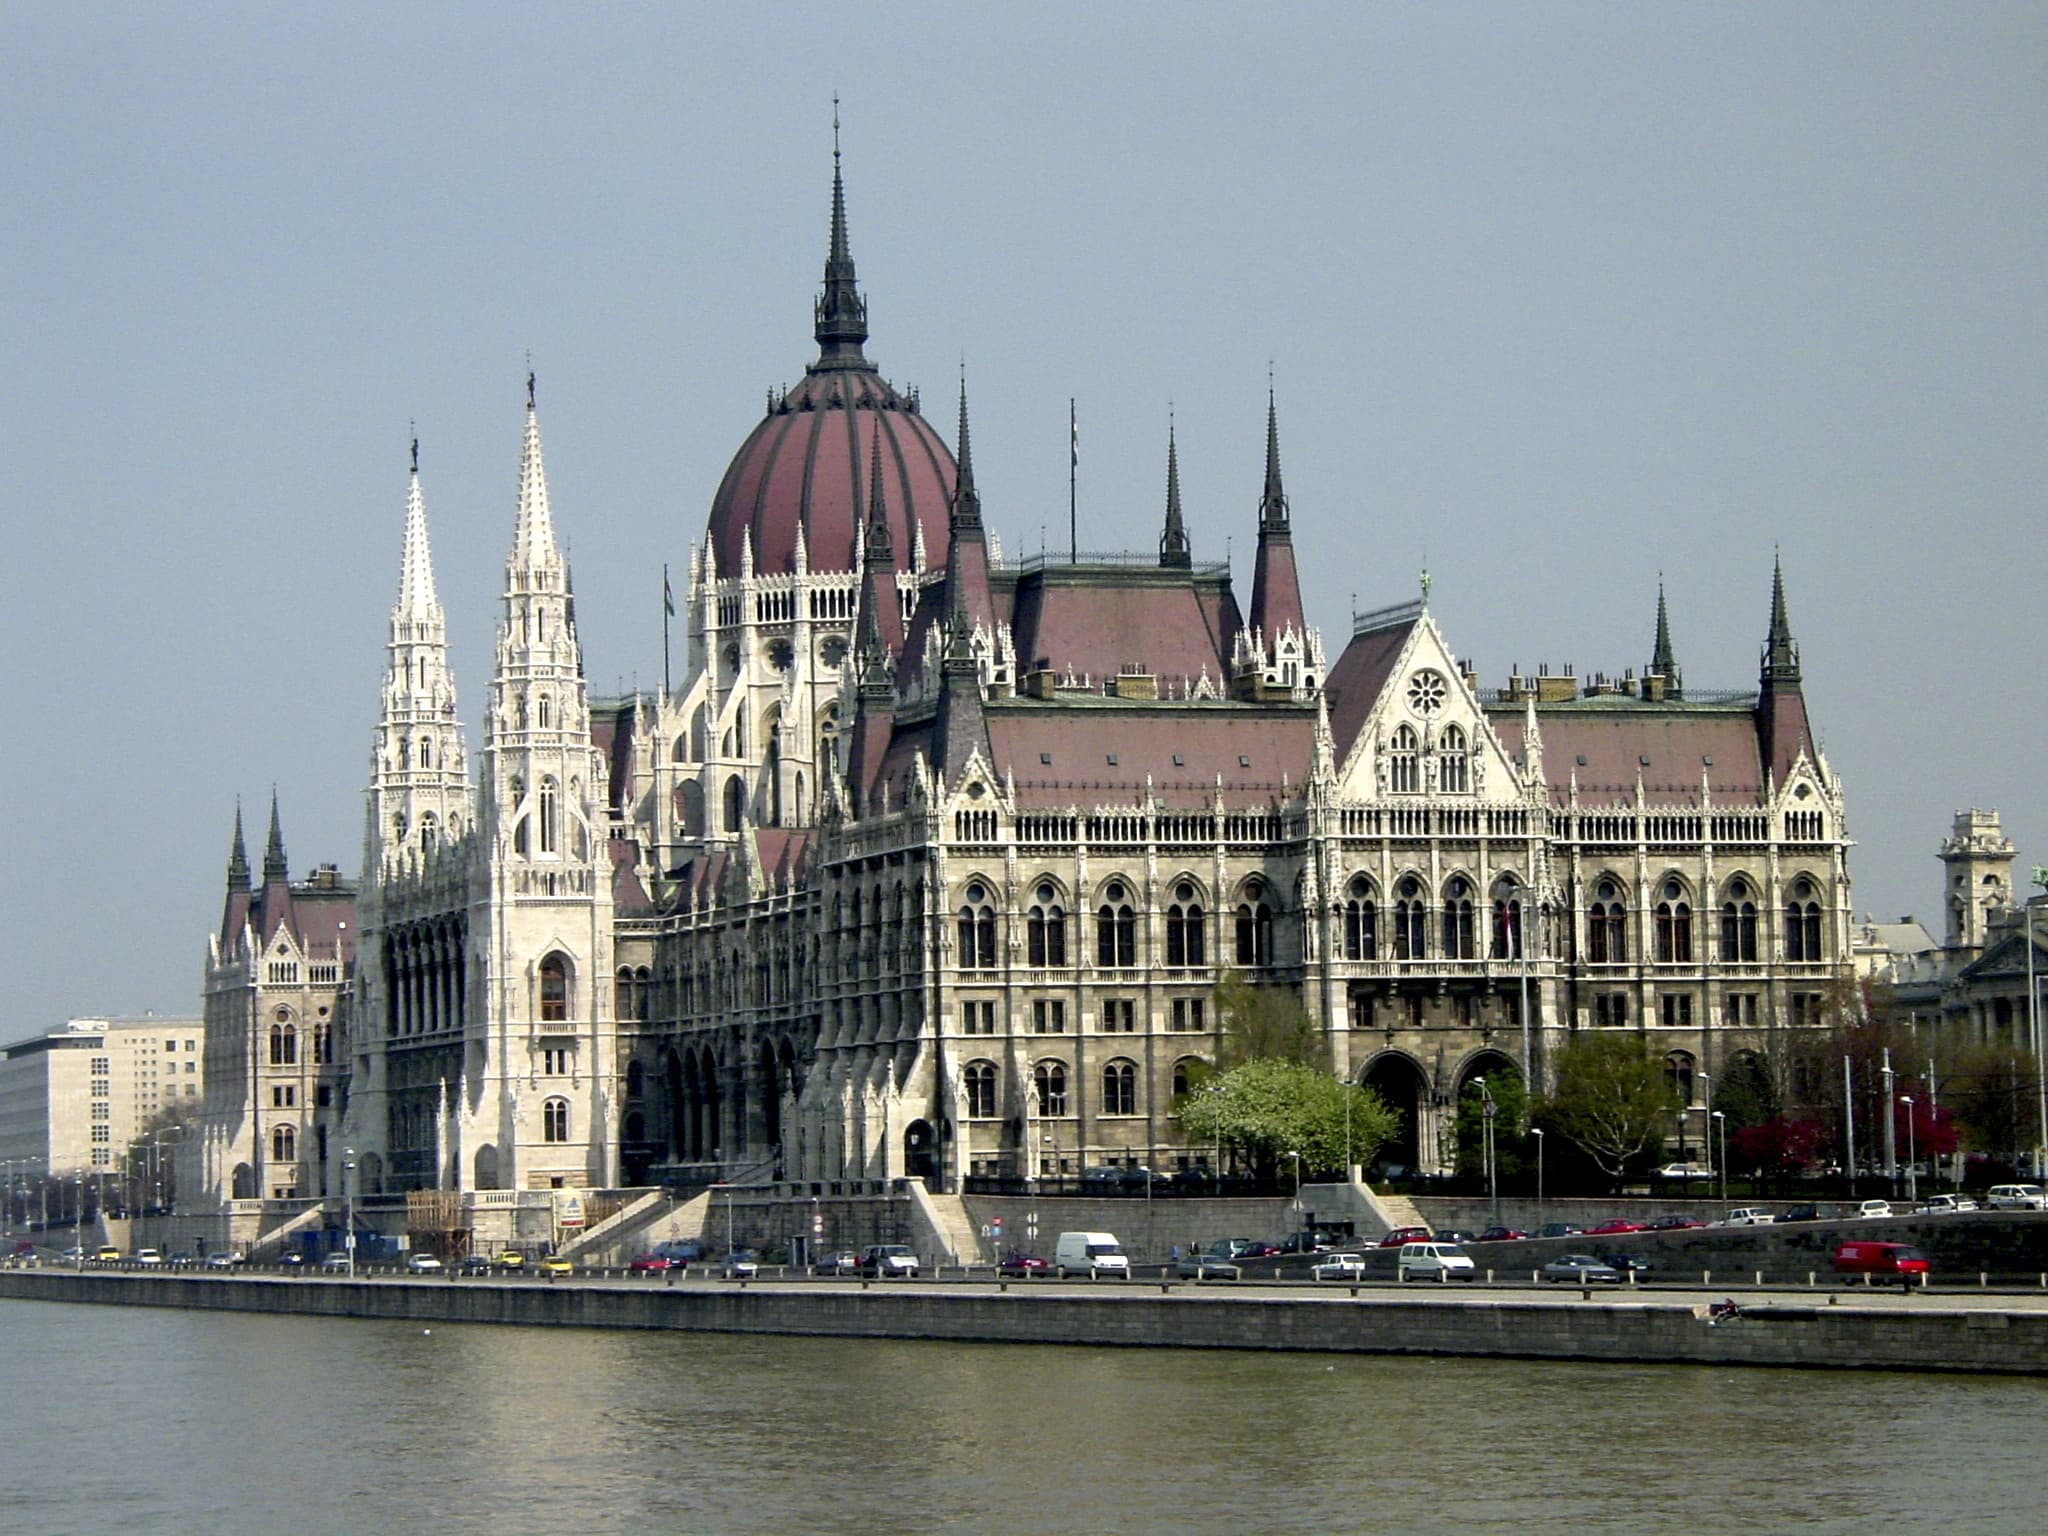 View of Parliament from the Danube River in Budapest